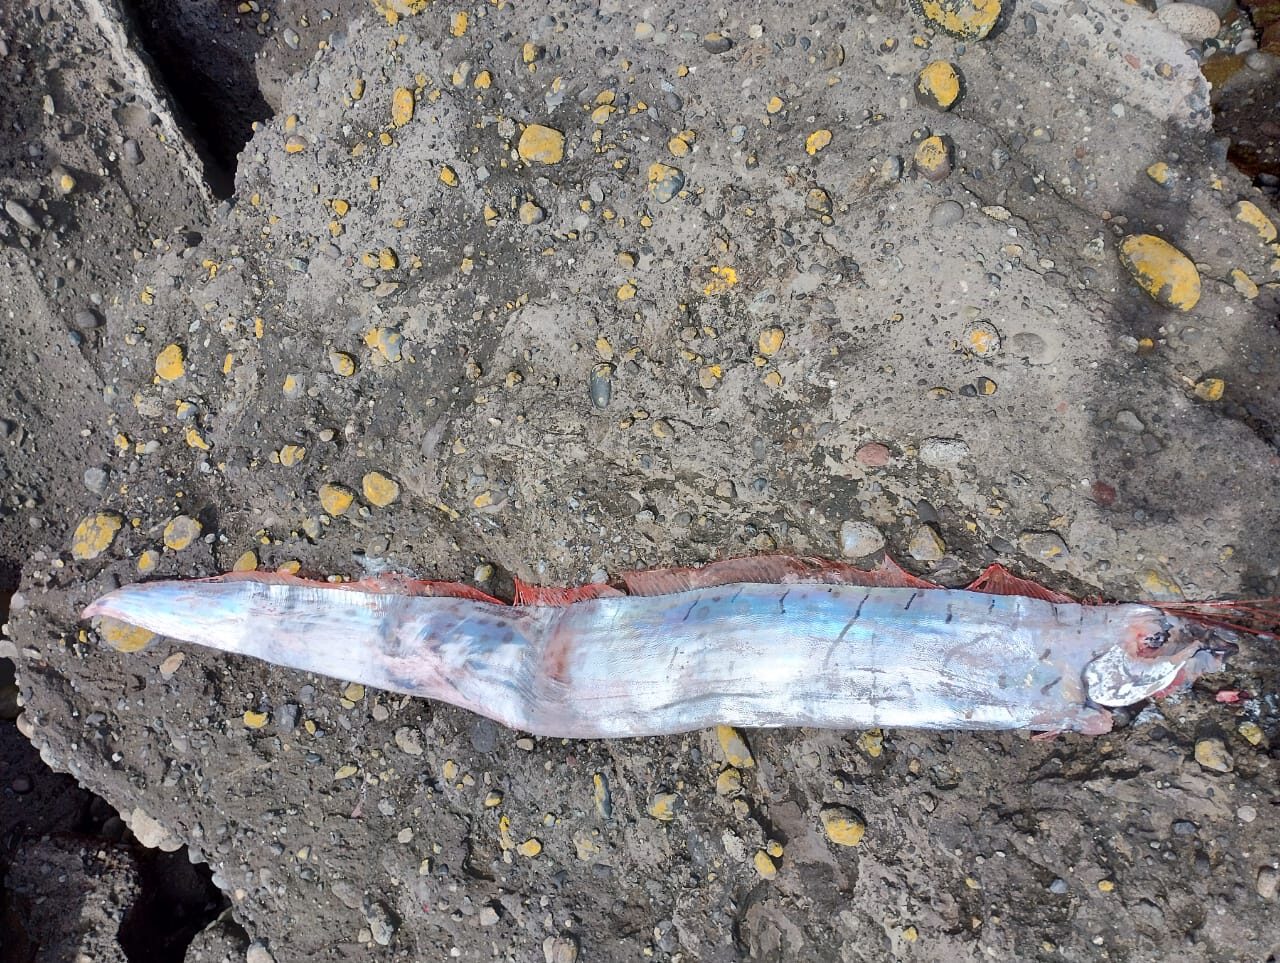 A 15-foot oarfish — thought to be a harbinger of impending earthquakes — washed ashore in Chile.